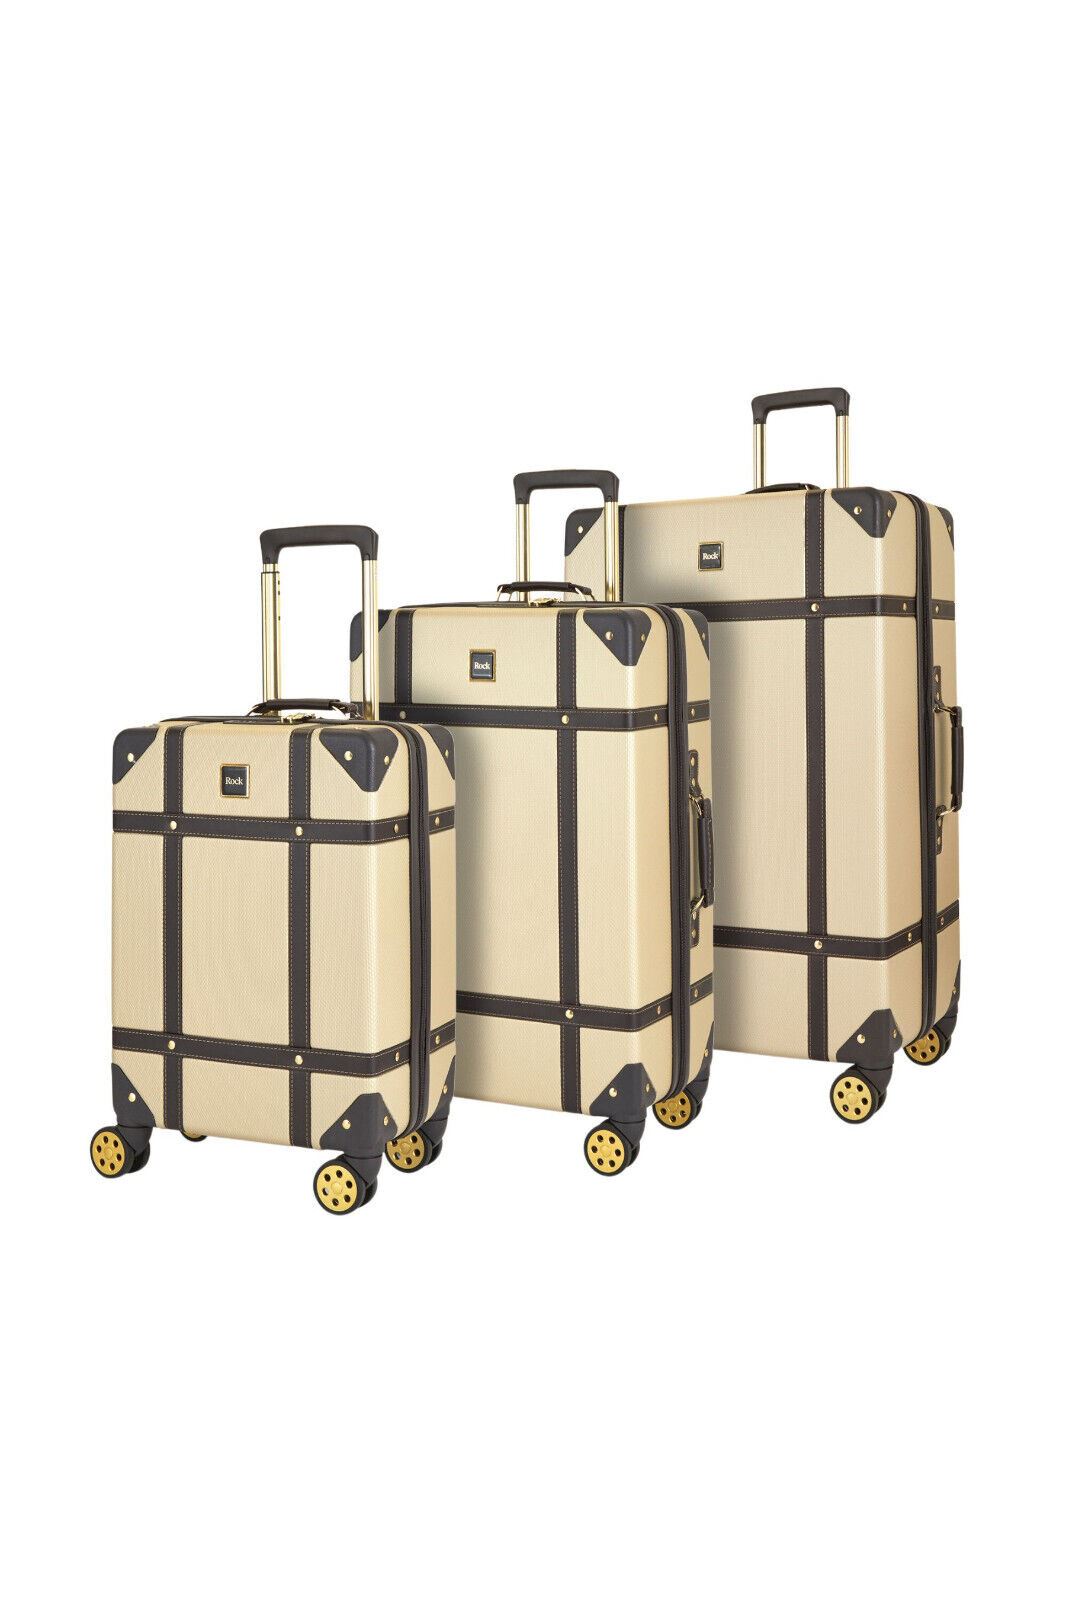 Hard Shell Gold Luggage Suitcase Set Trunk Cabin Travel Bags - Upperclass Fashions 